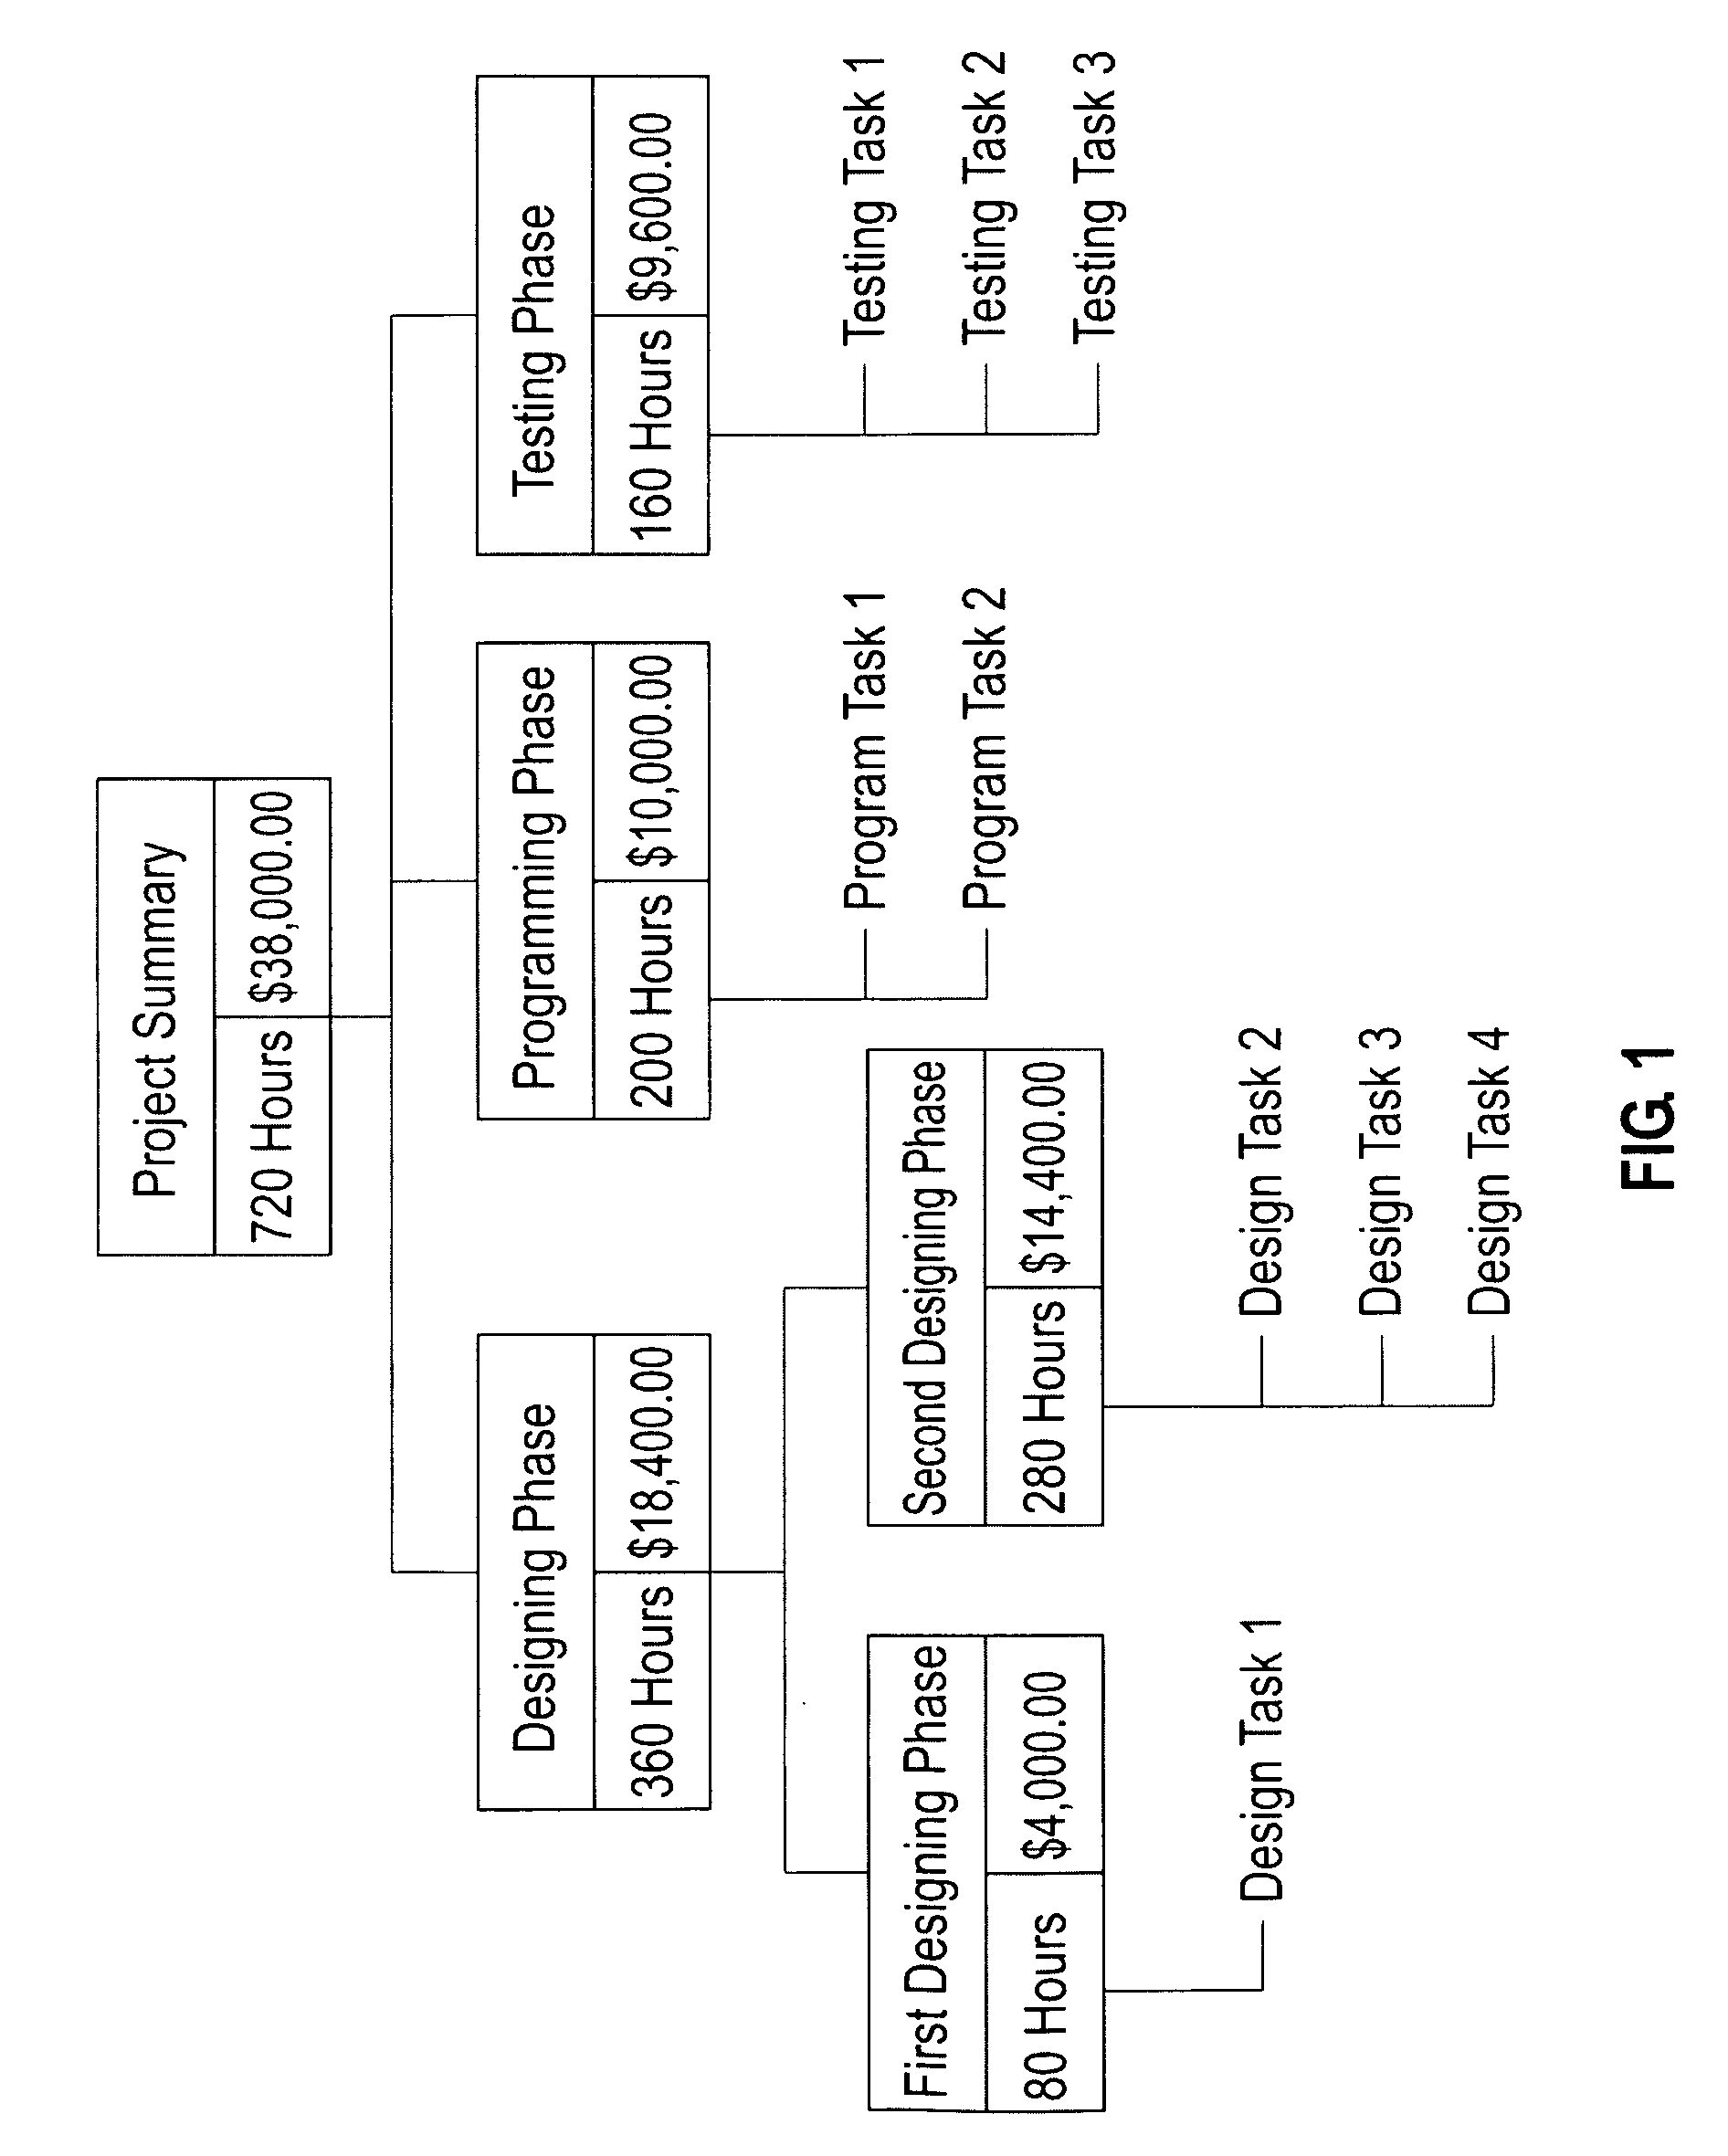 Design managing means, design tool and method for work breakdown structure